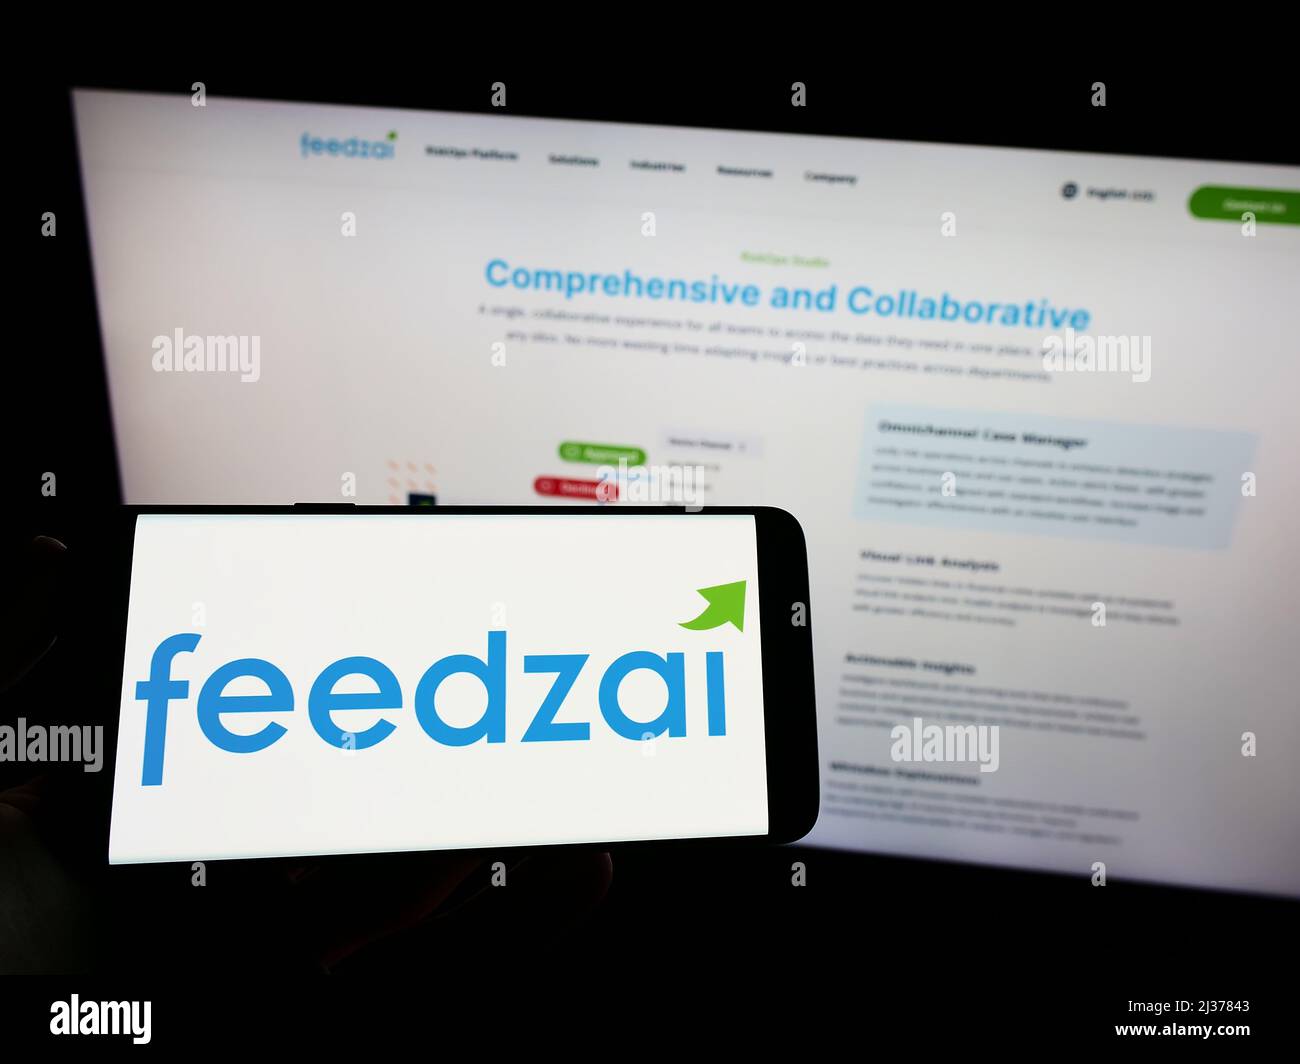 Person holding mobile phone with logo of Portuguese risk management company Feedzai on screen in front of web page. Focus on phone display. Stock Photo